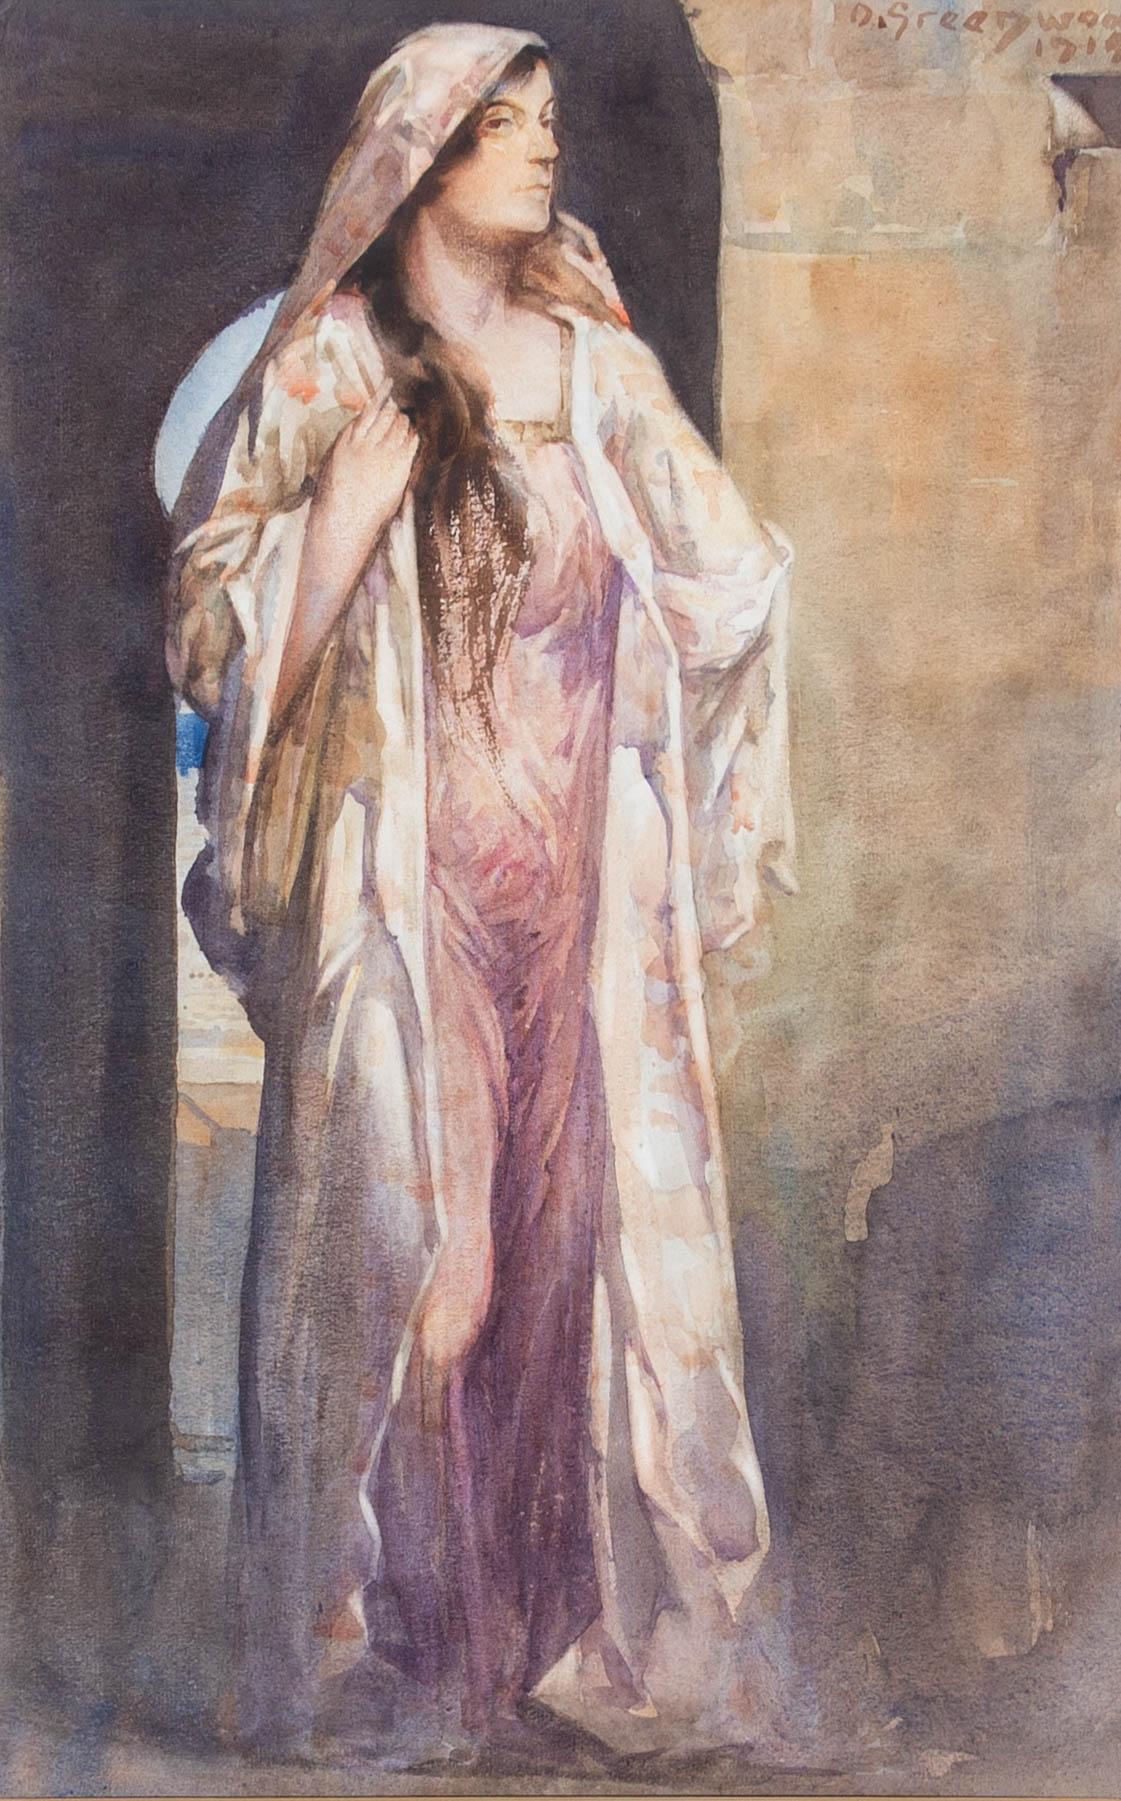 This delightful portrait depicts a lady in a floating dress. Painted in a Greek revival manner, the subject is captured in an stone arched entrance, with fair features and flowing hair. Greenwood's delicate use of watercolour and fine attention